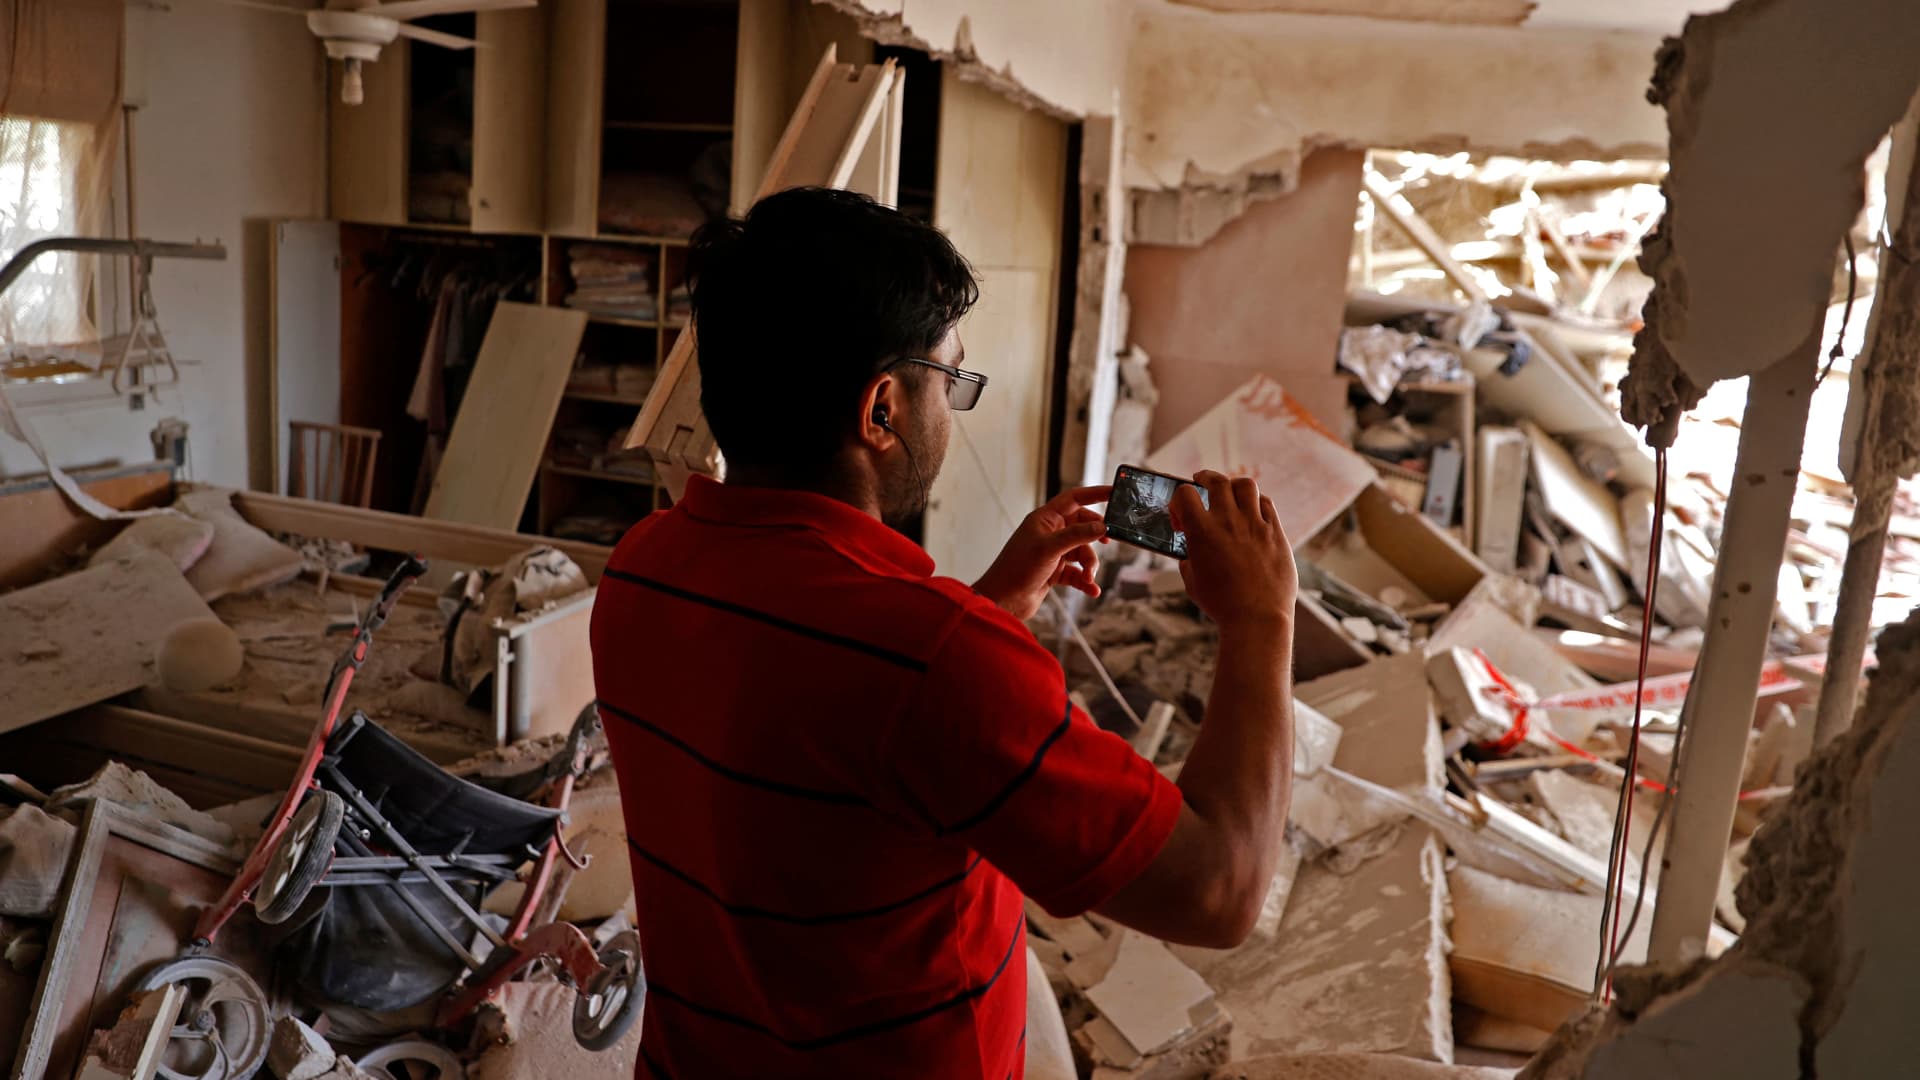 An Israeli man takes a picture of a heavily damaged house in the southern Israeli city of Ashkelon on May 11, 2021, as rockets are fired by the Hamas movement from the Gaza Strip toward Israel.